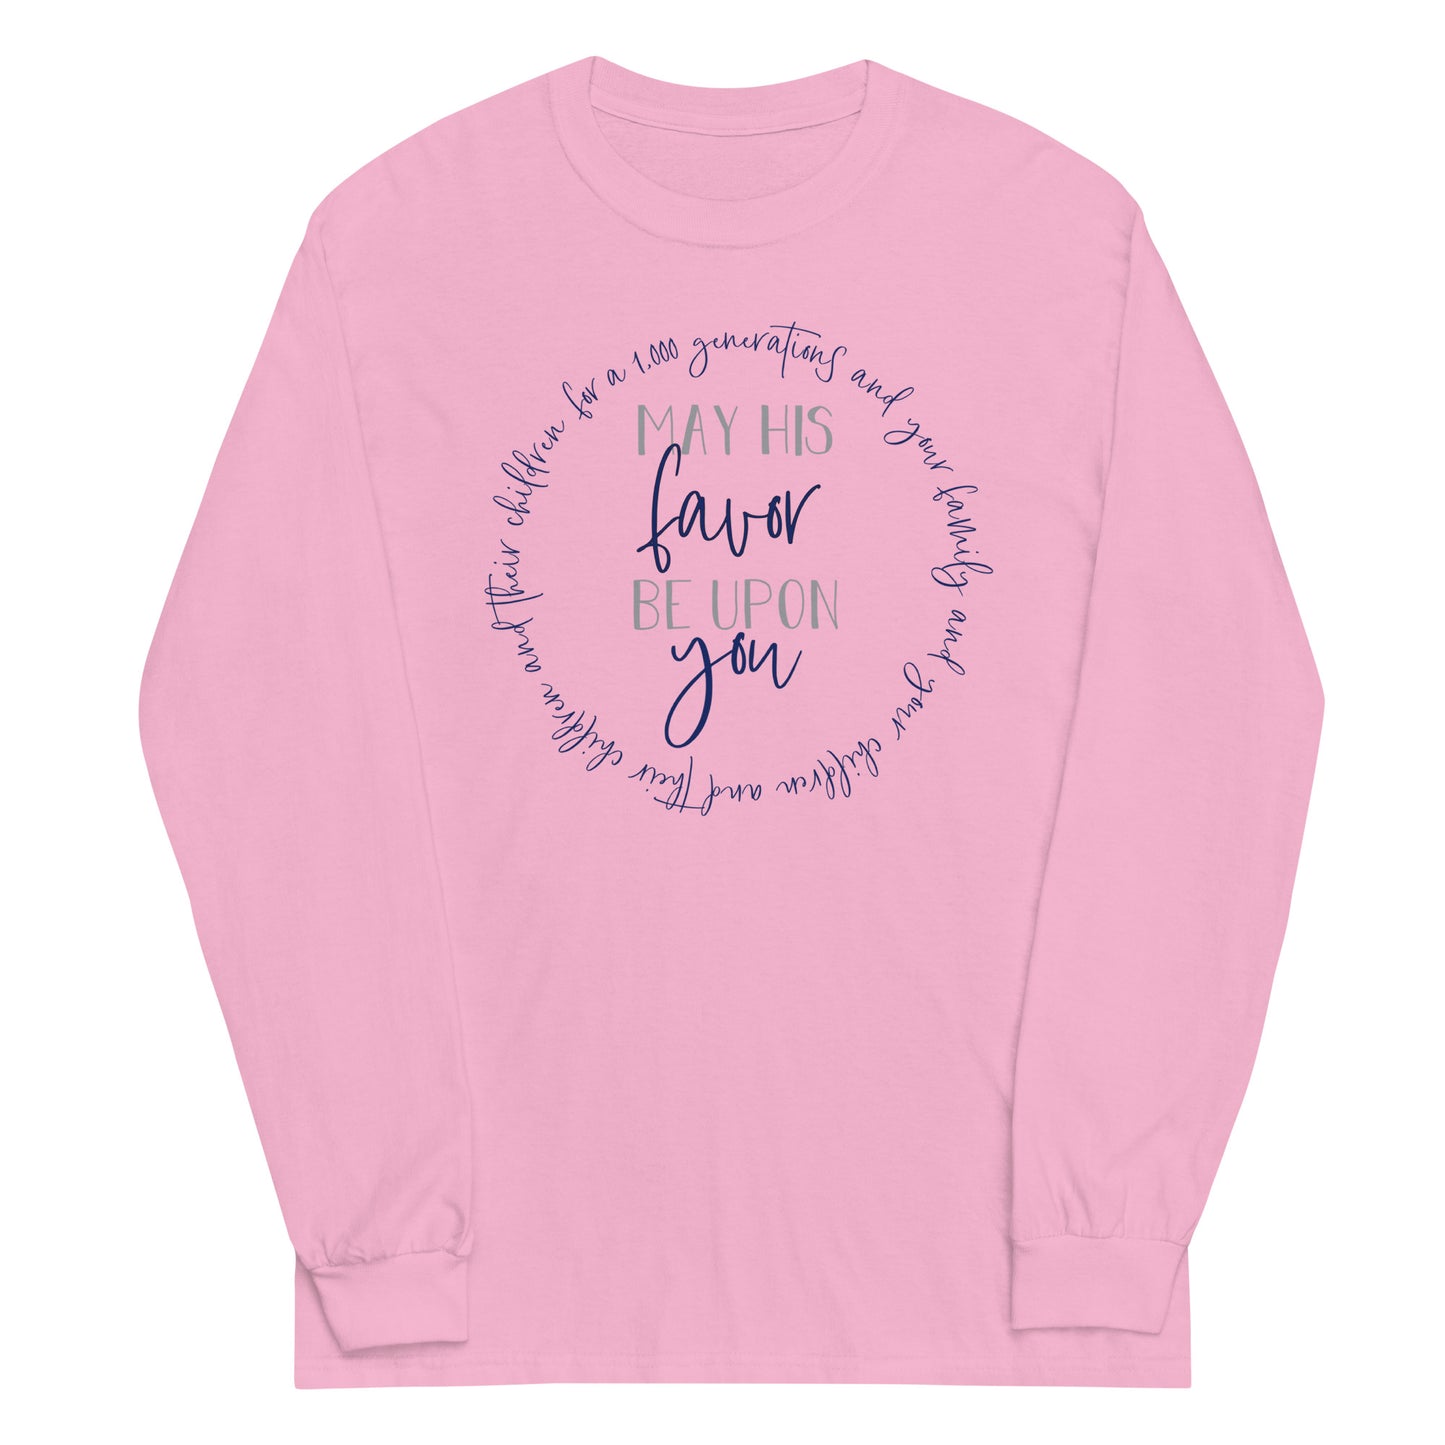 May His Favor Be Upon You Numbers 6 Blessing Christian aesthetic design printed in navy and gray on soft pink long sleeve tee for women